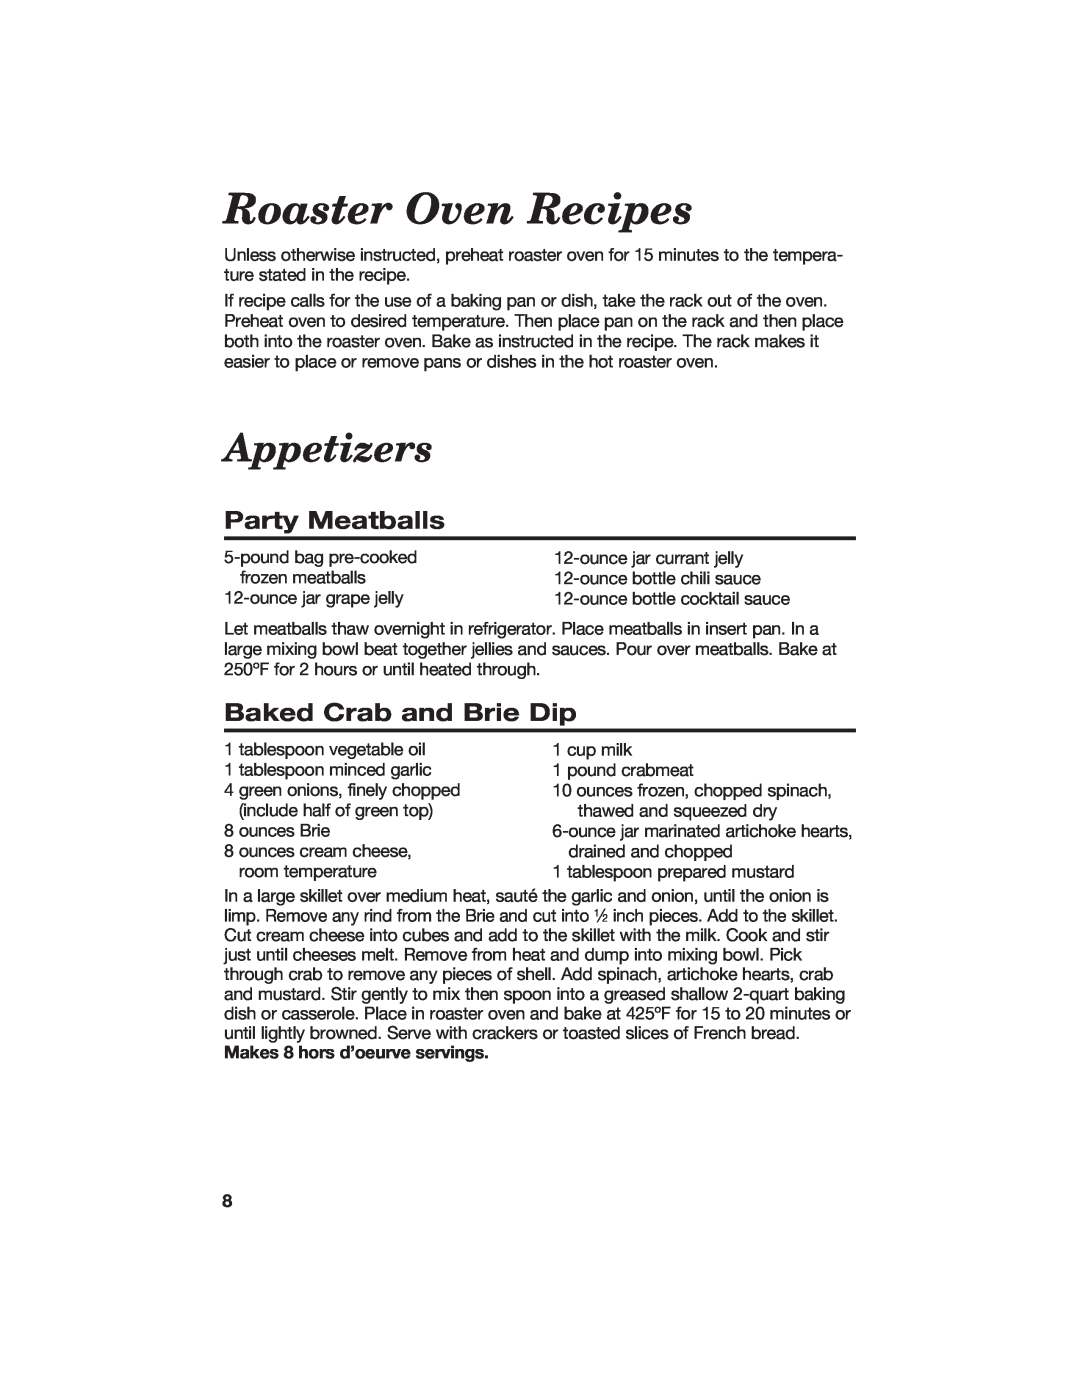 Hamilton Beach manual Roaster Oven Recipes, Appetizers, Party Meatballs, Baked Crab and Brie Dip 